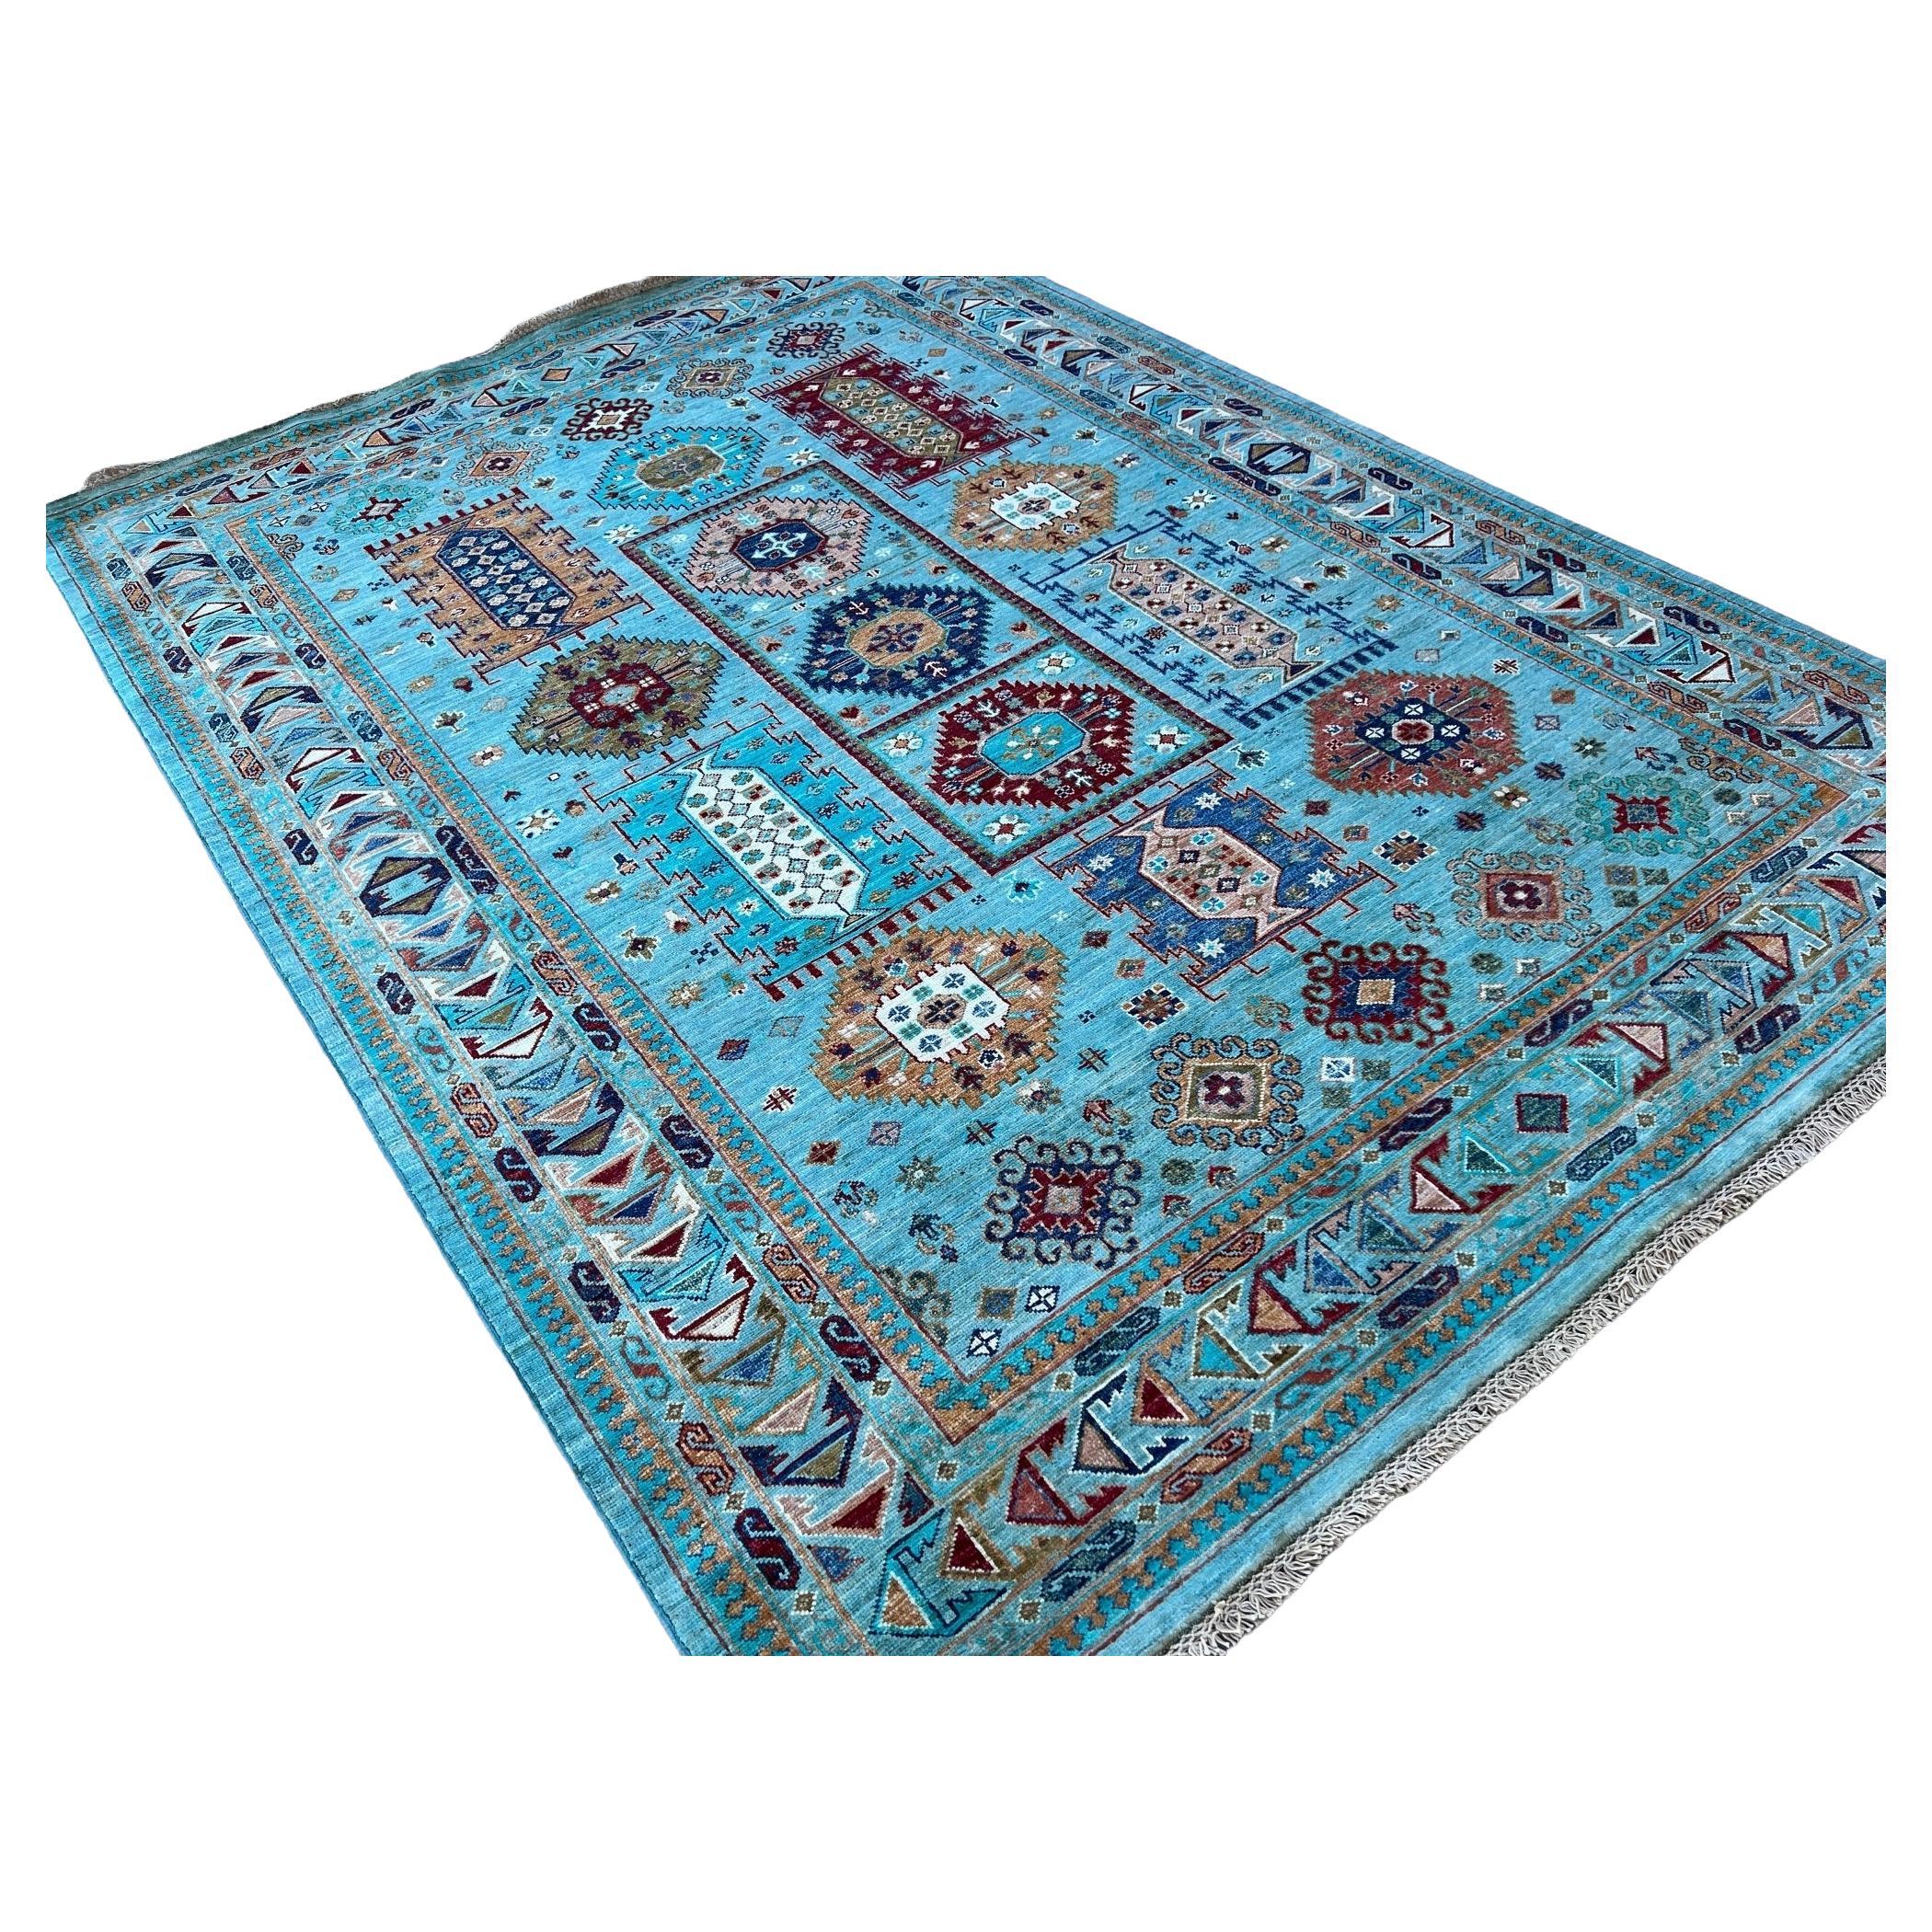 7x8 Hand-Knotted Afghan Rug Premium Hand-Spun Afghan Wool Fair Trade Turquoise  For Sale